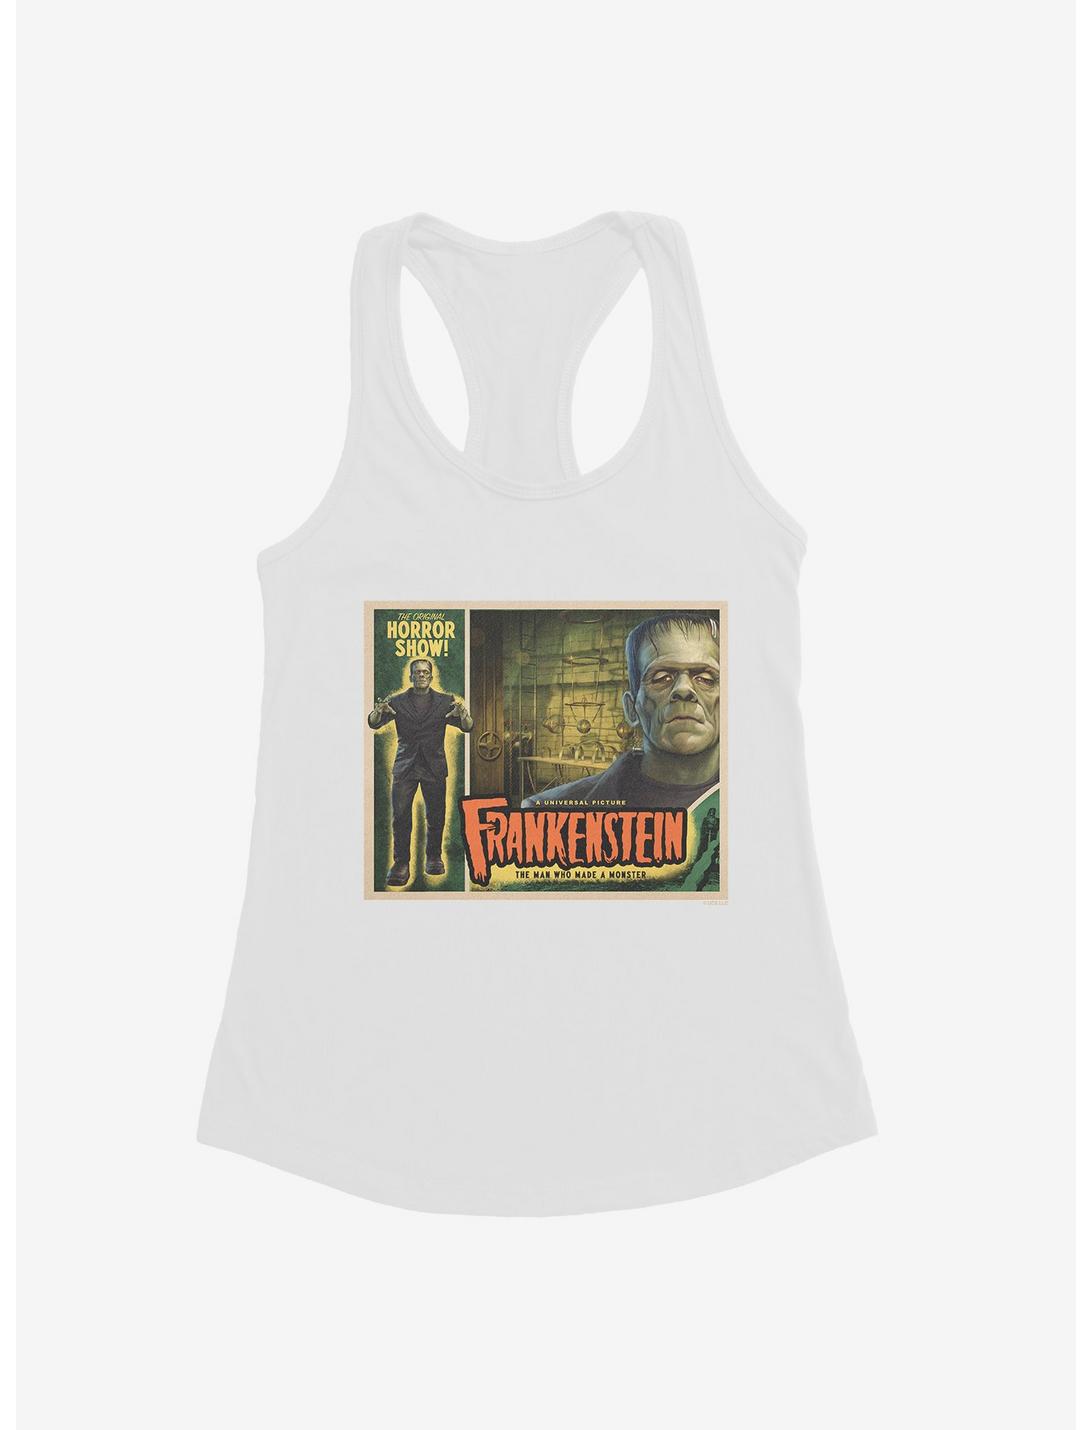 Frankenstein The Man Who Made A Monster Girls Tank, , hi-res